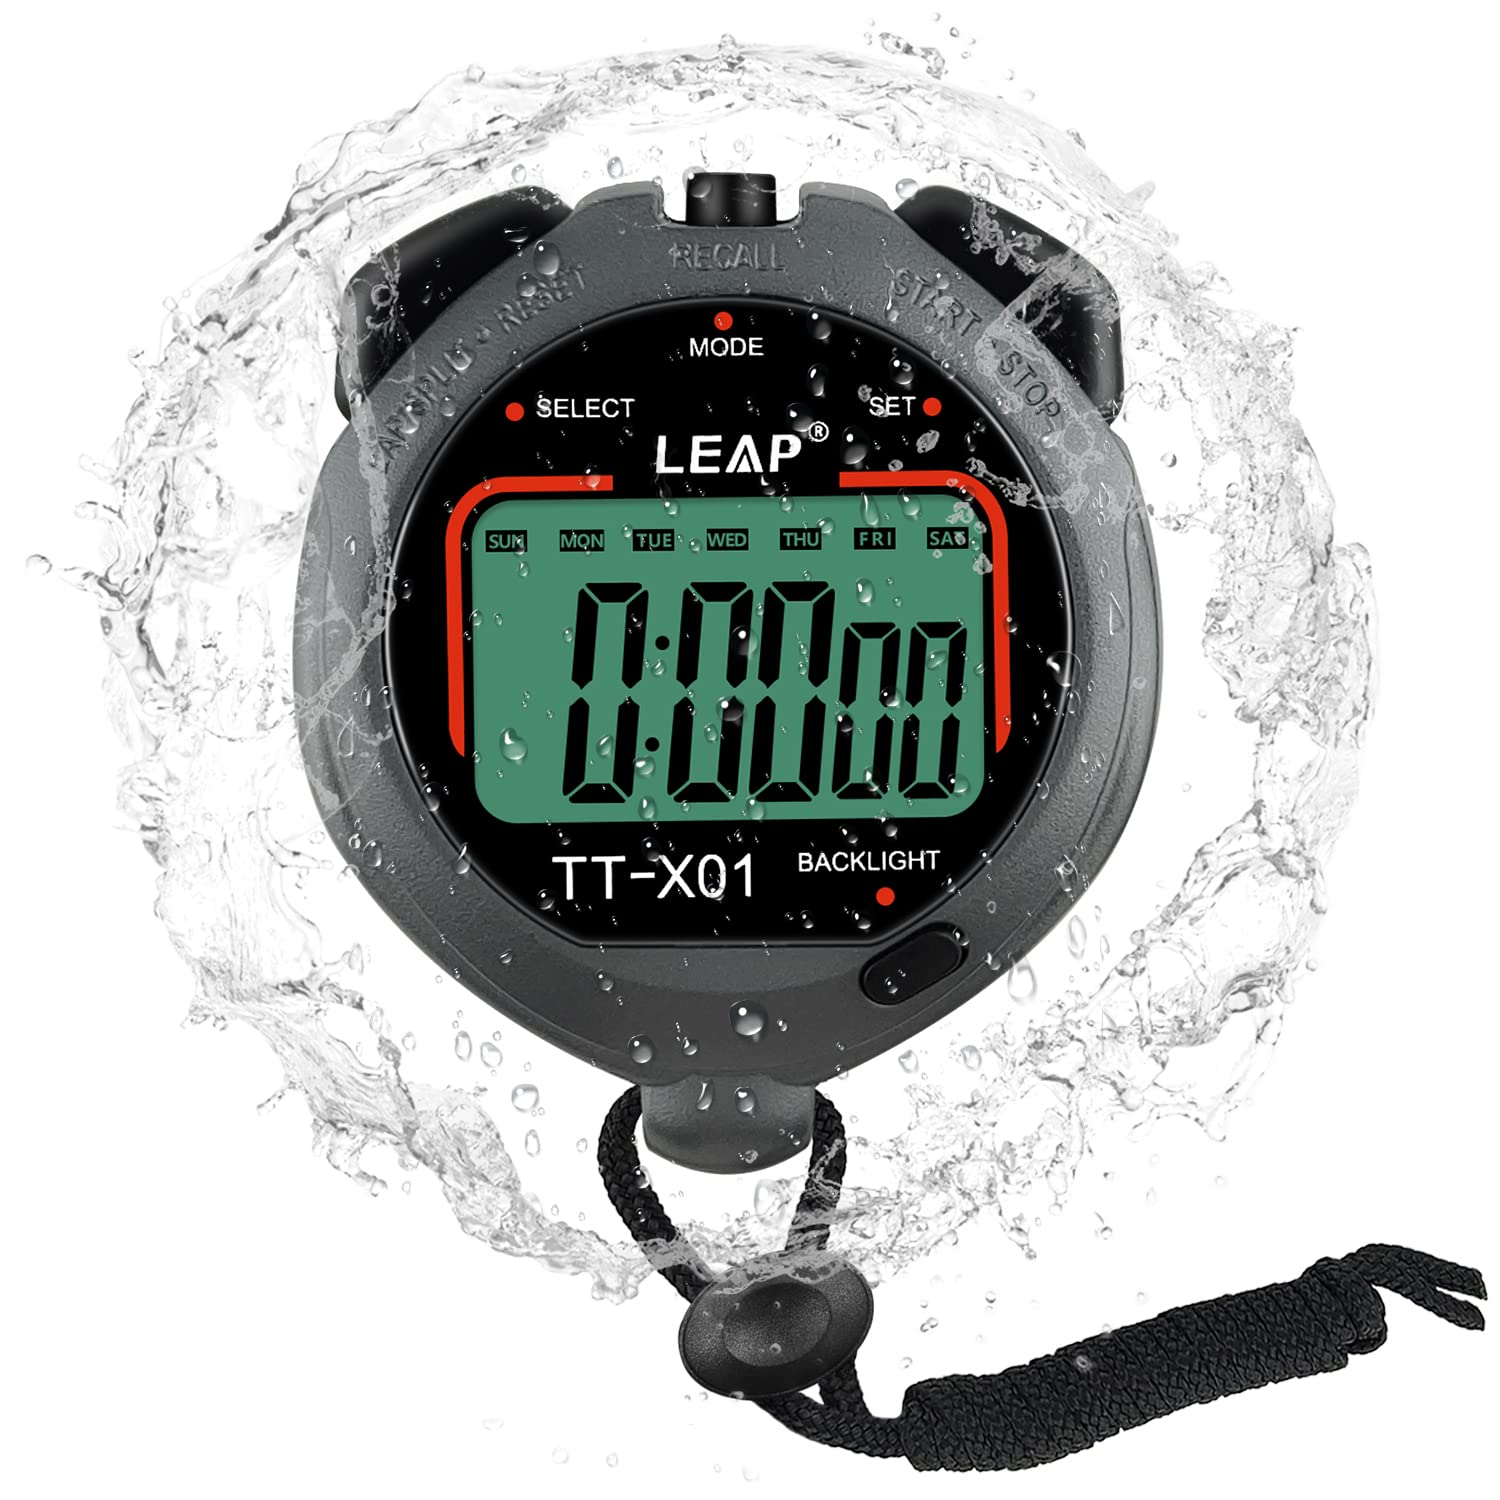 Professional Sports Timer, Athletics Electronic Stopwatch For